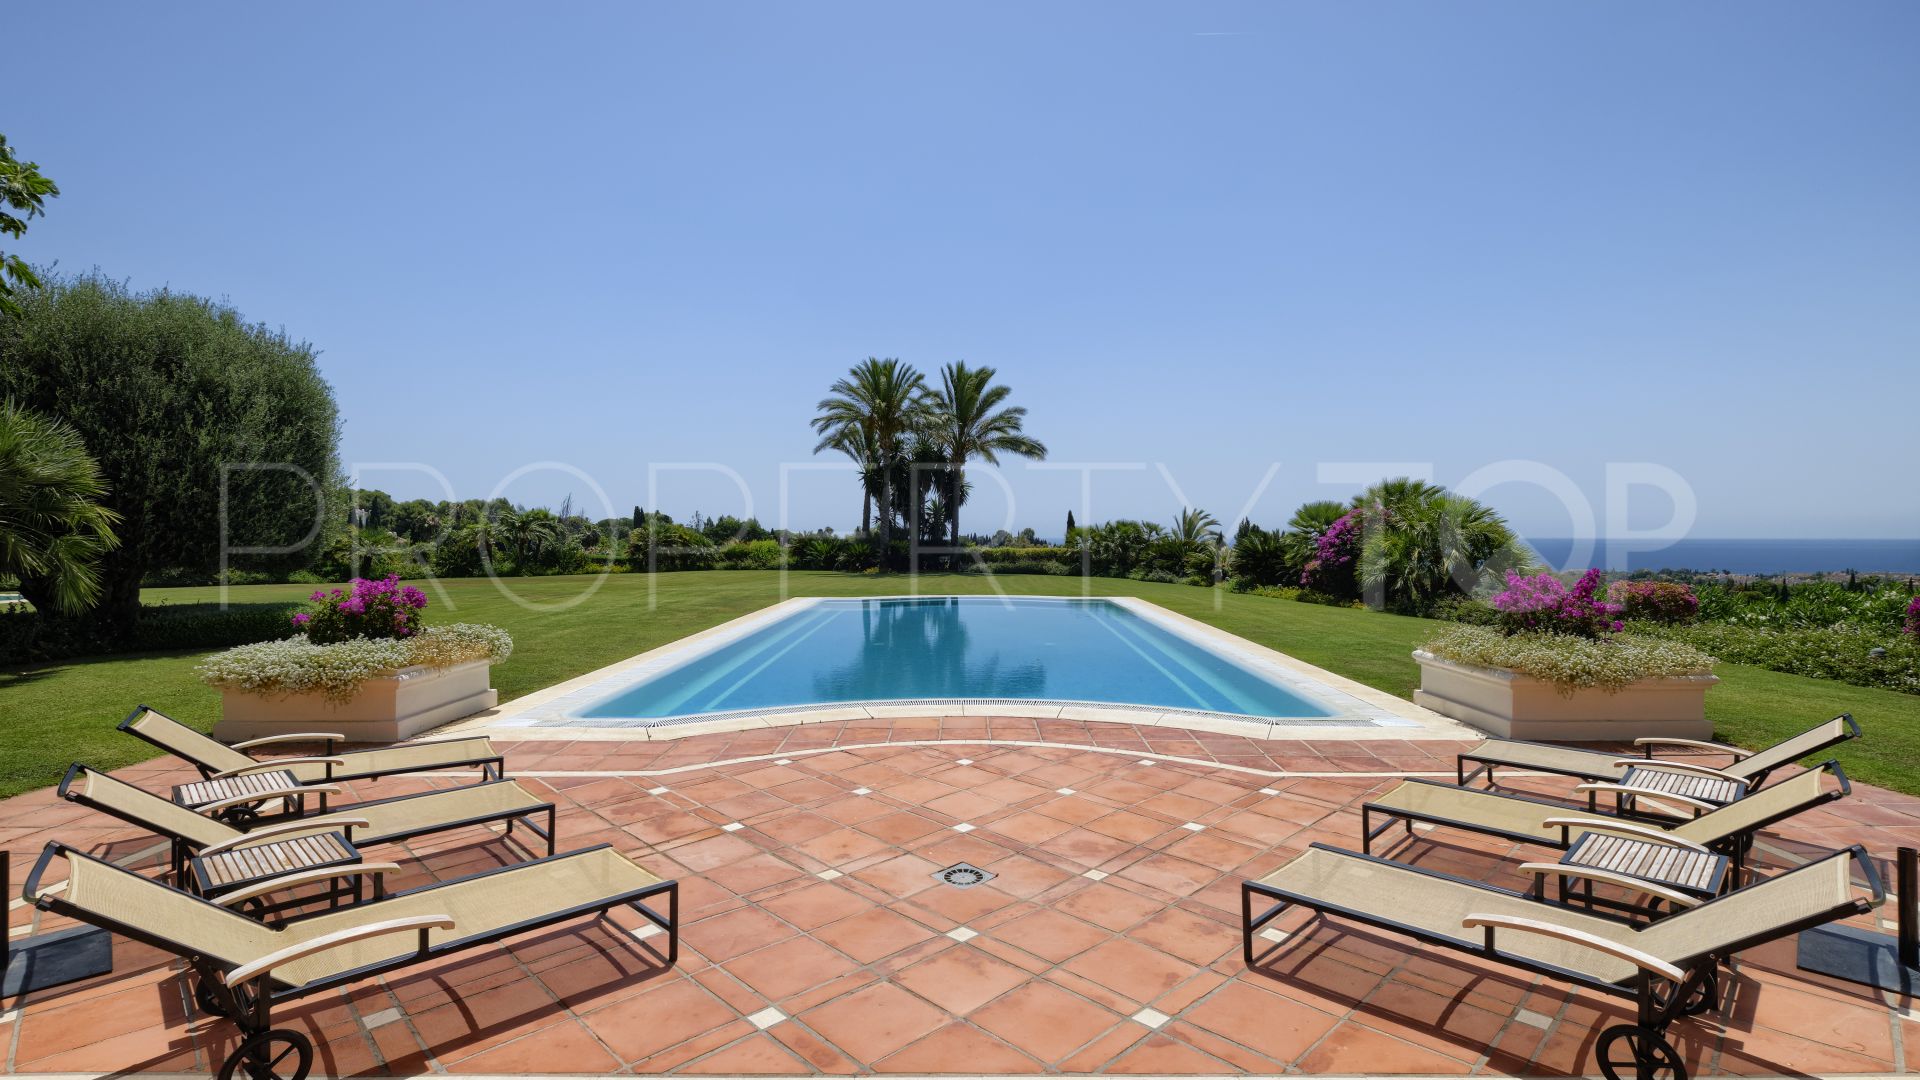 For sale villa in Marbella Hill Club with 5 bedrooms